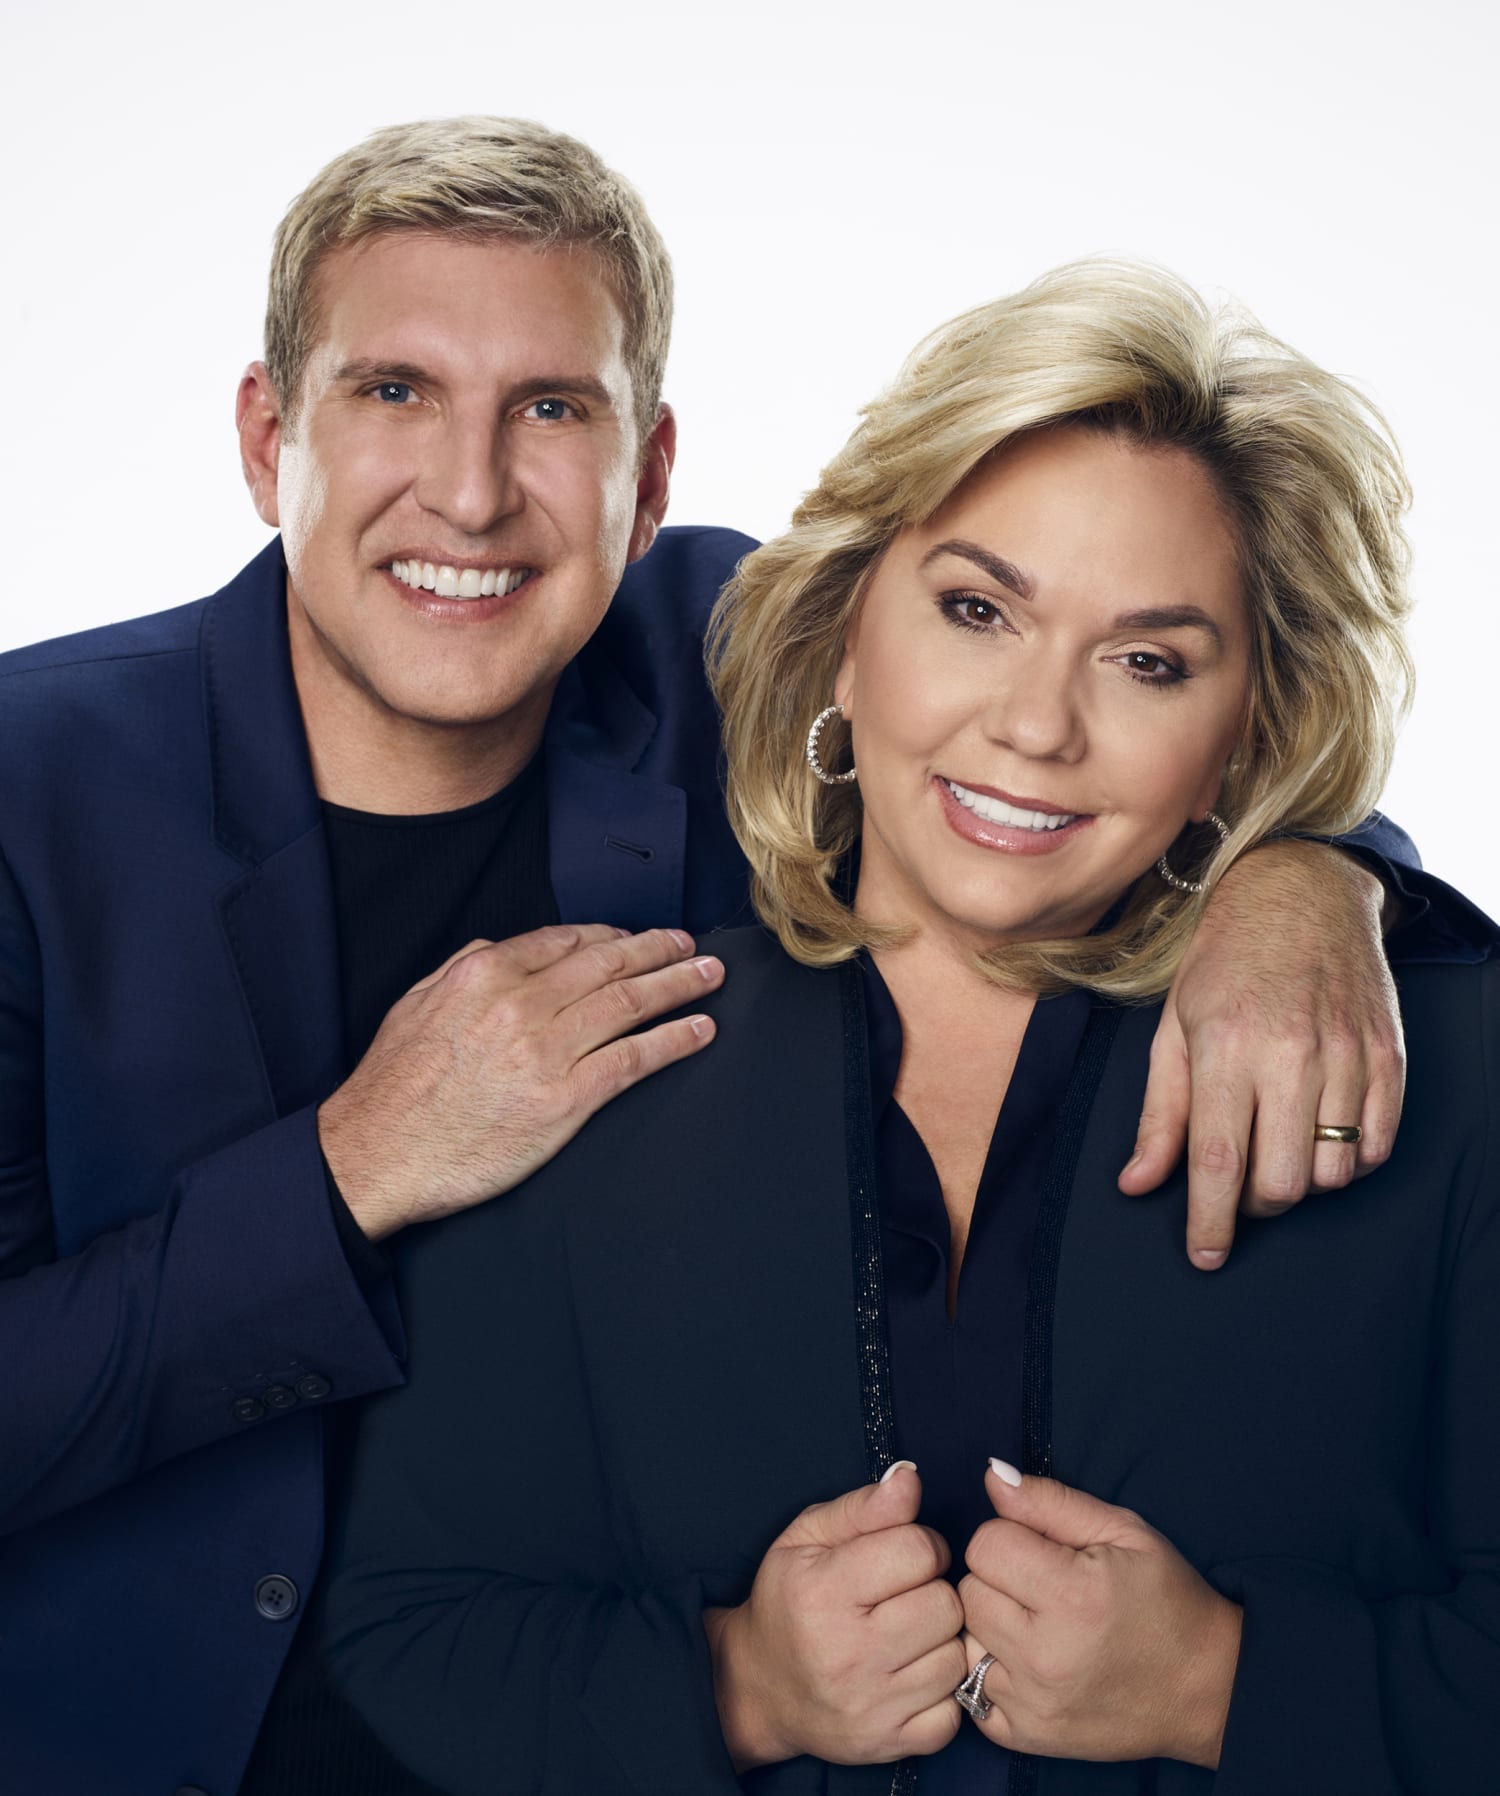 Reality stars Todd, Julie Chrisley on tax evasion charges: 'Nothing to hide'